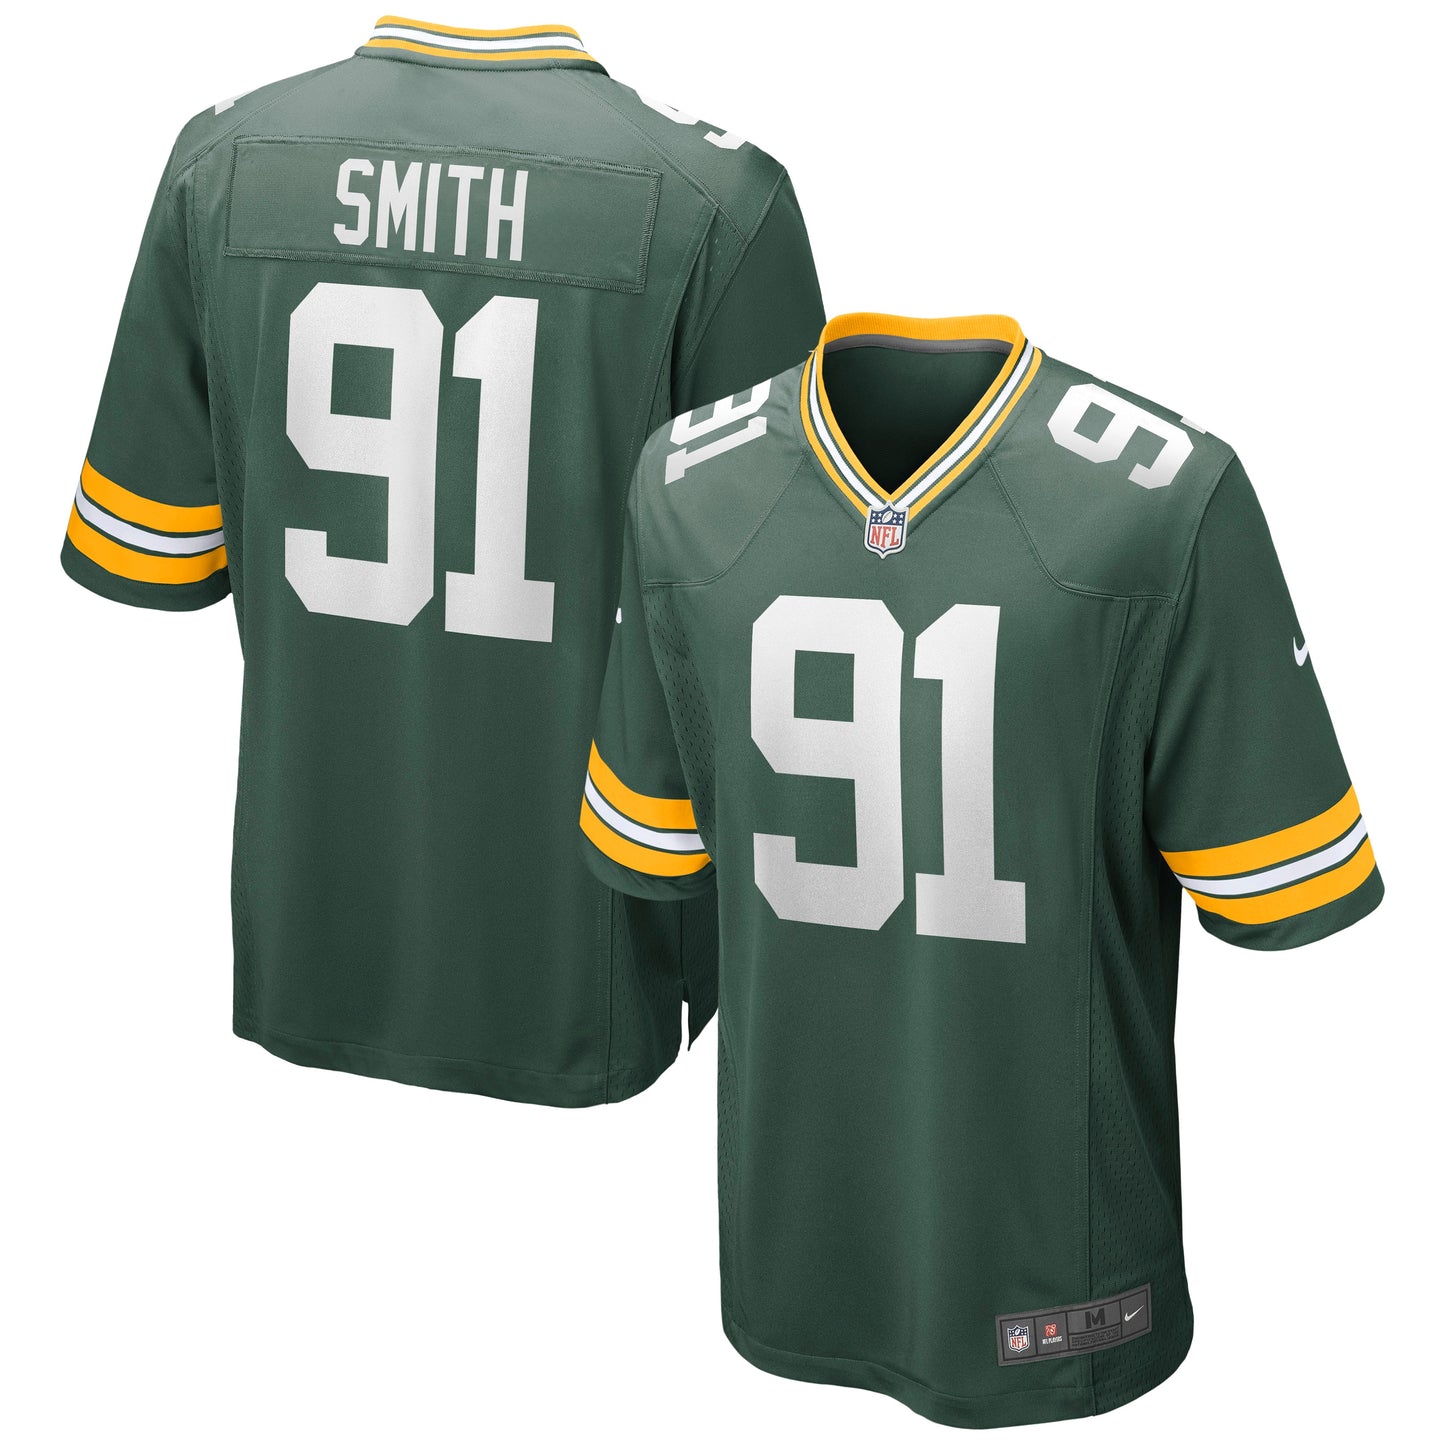 Preston Smith Green Bay Packers Nike Game Jersey - Green